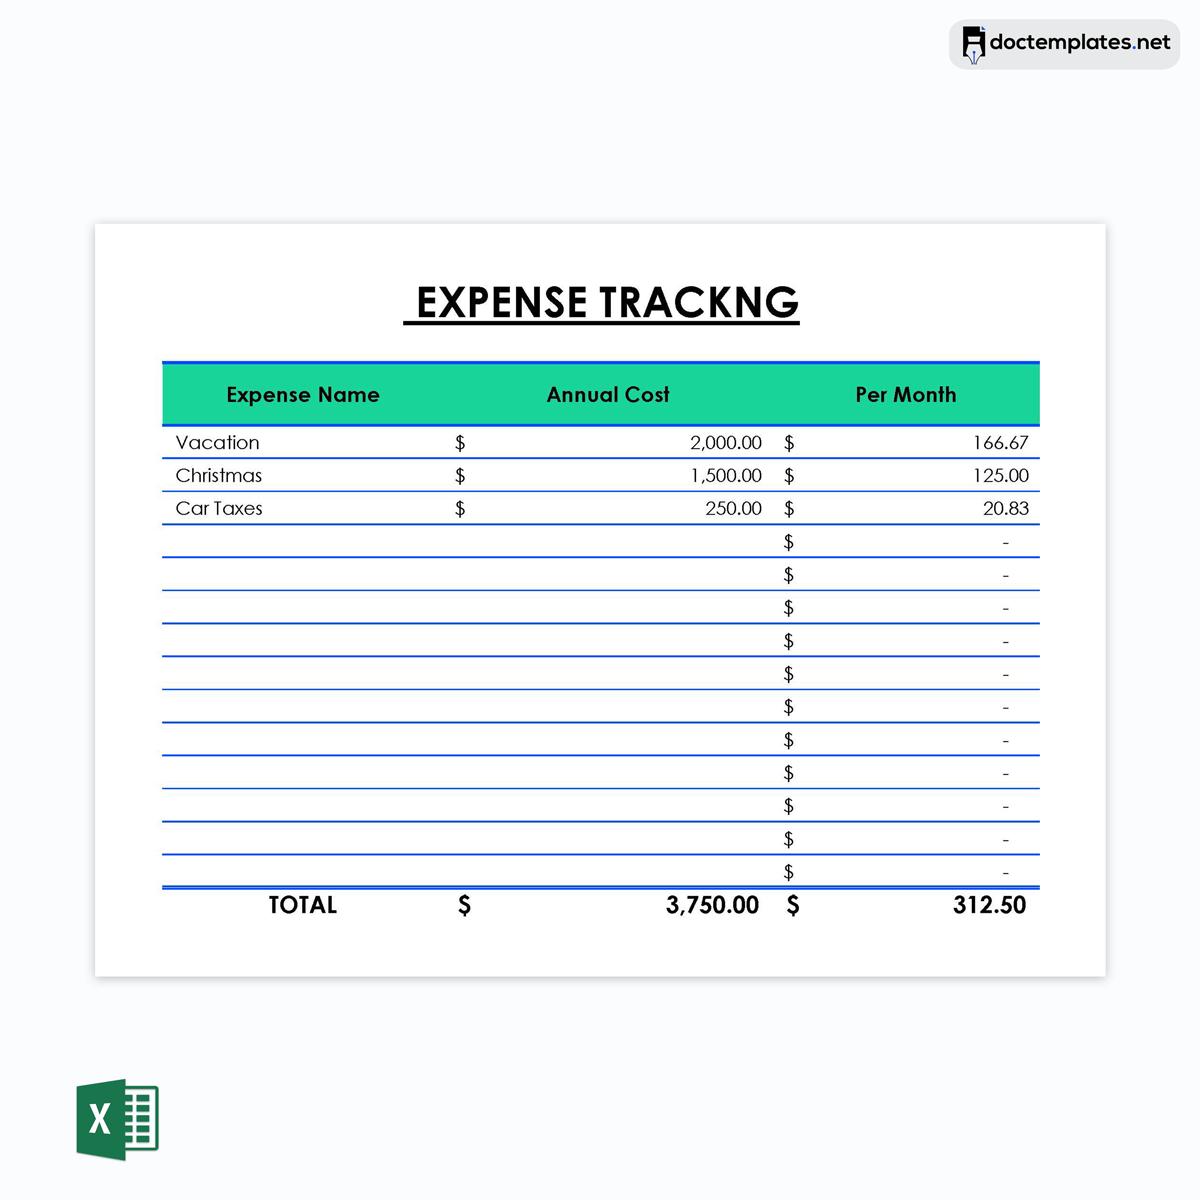 expense report template excel
free expense report
